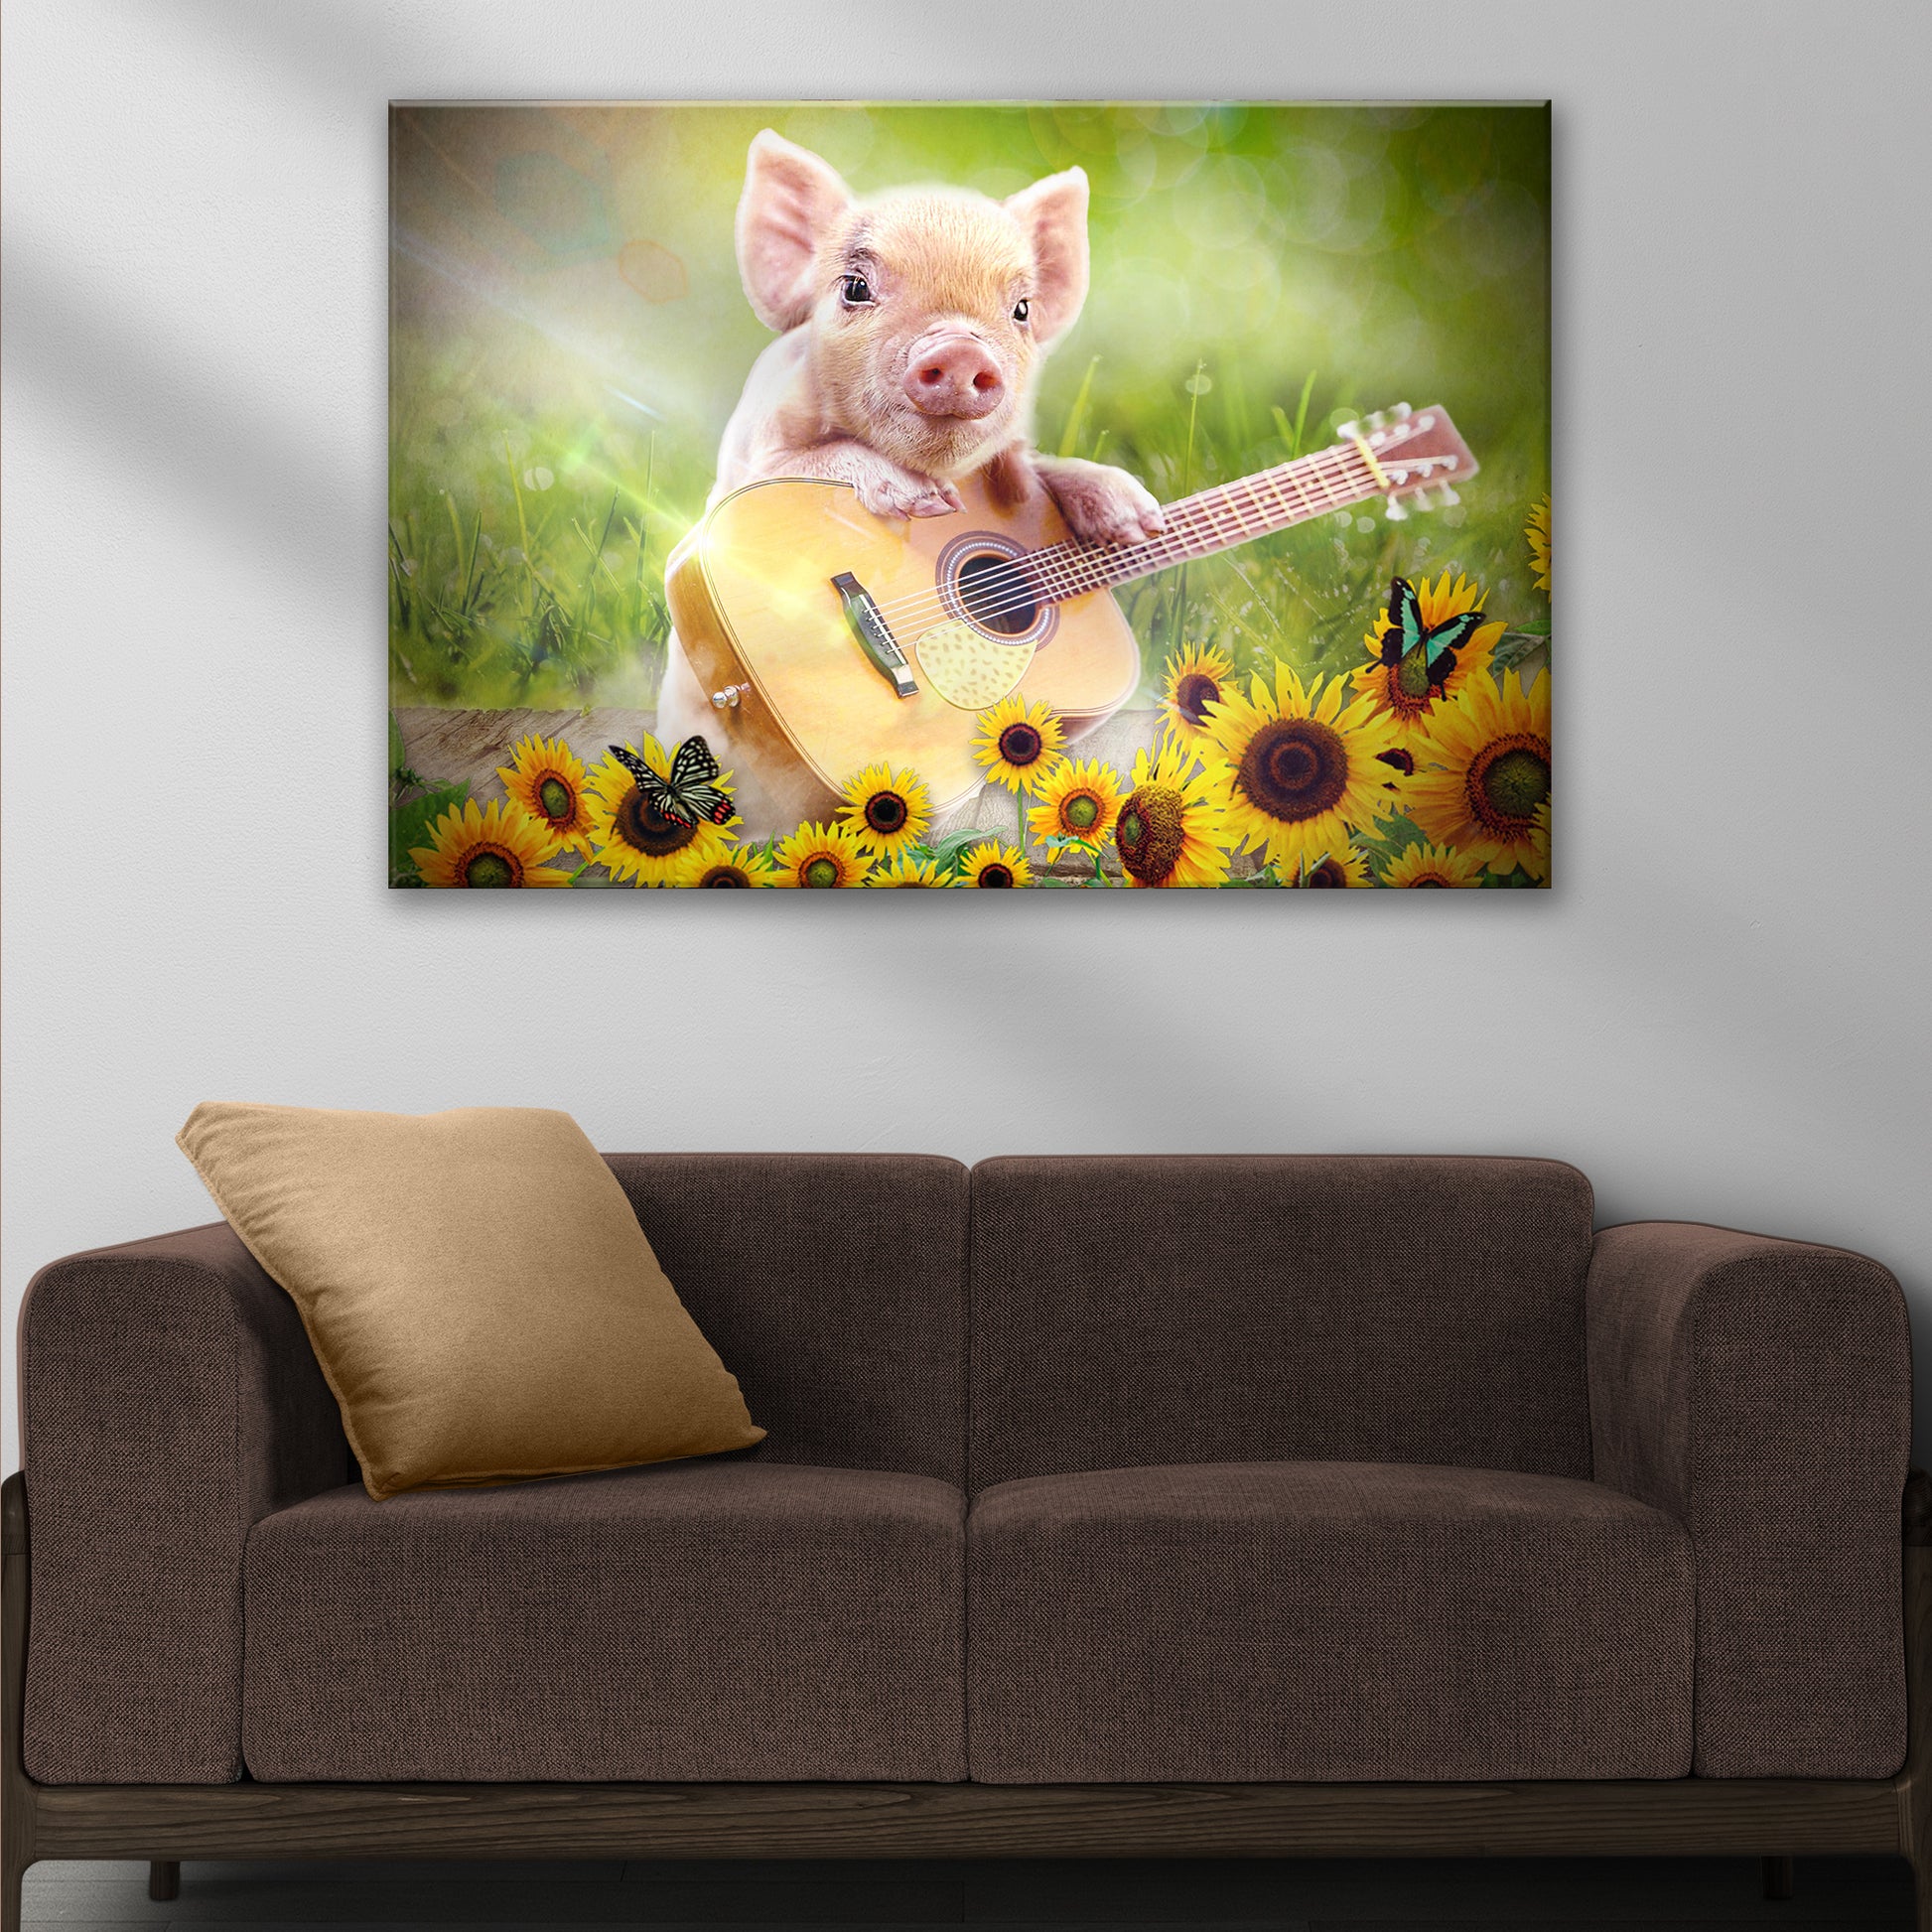 Guitarist Piglet Canvas Wall Art Style 2 - Image by Tailored Canvases